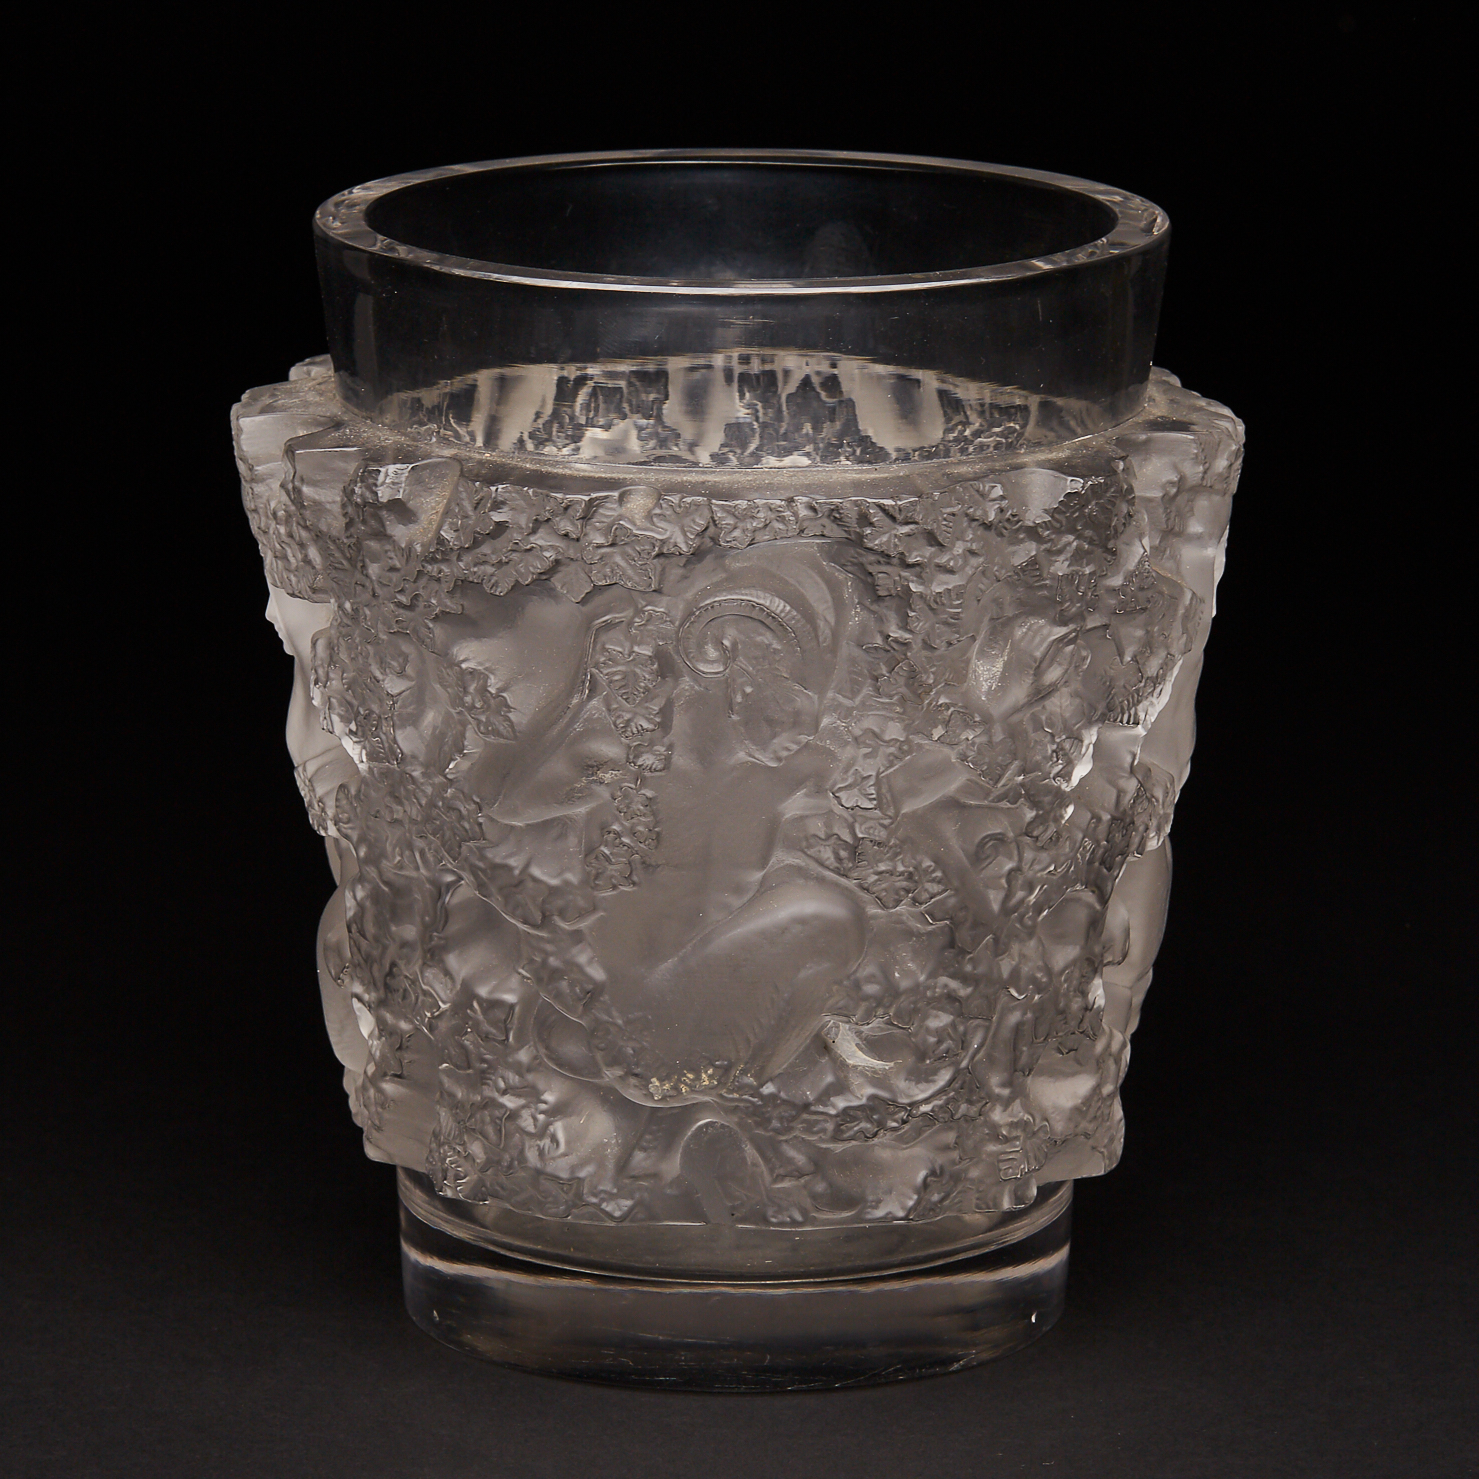 ‘Bacchus’, Lalique Moulded and Partly Frosted Glass Vase, post-1945